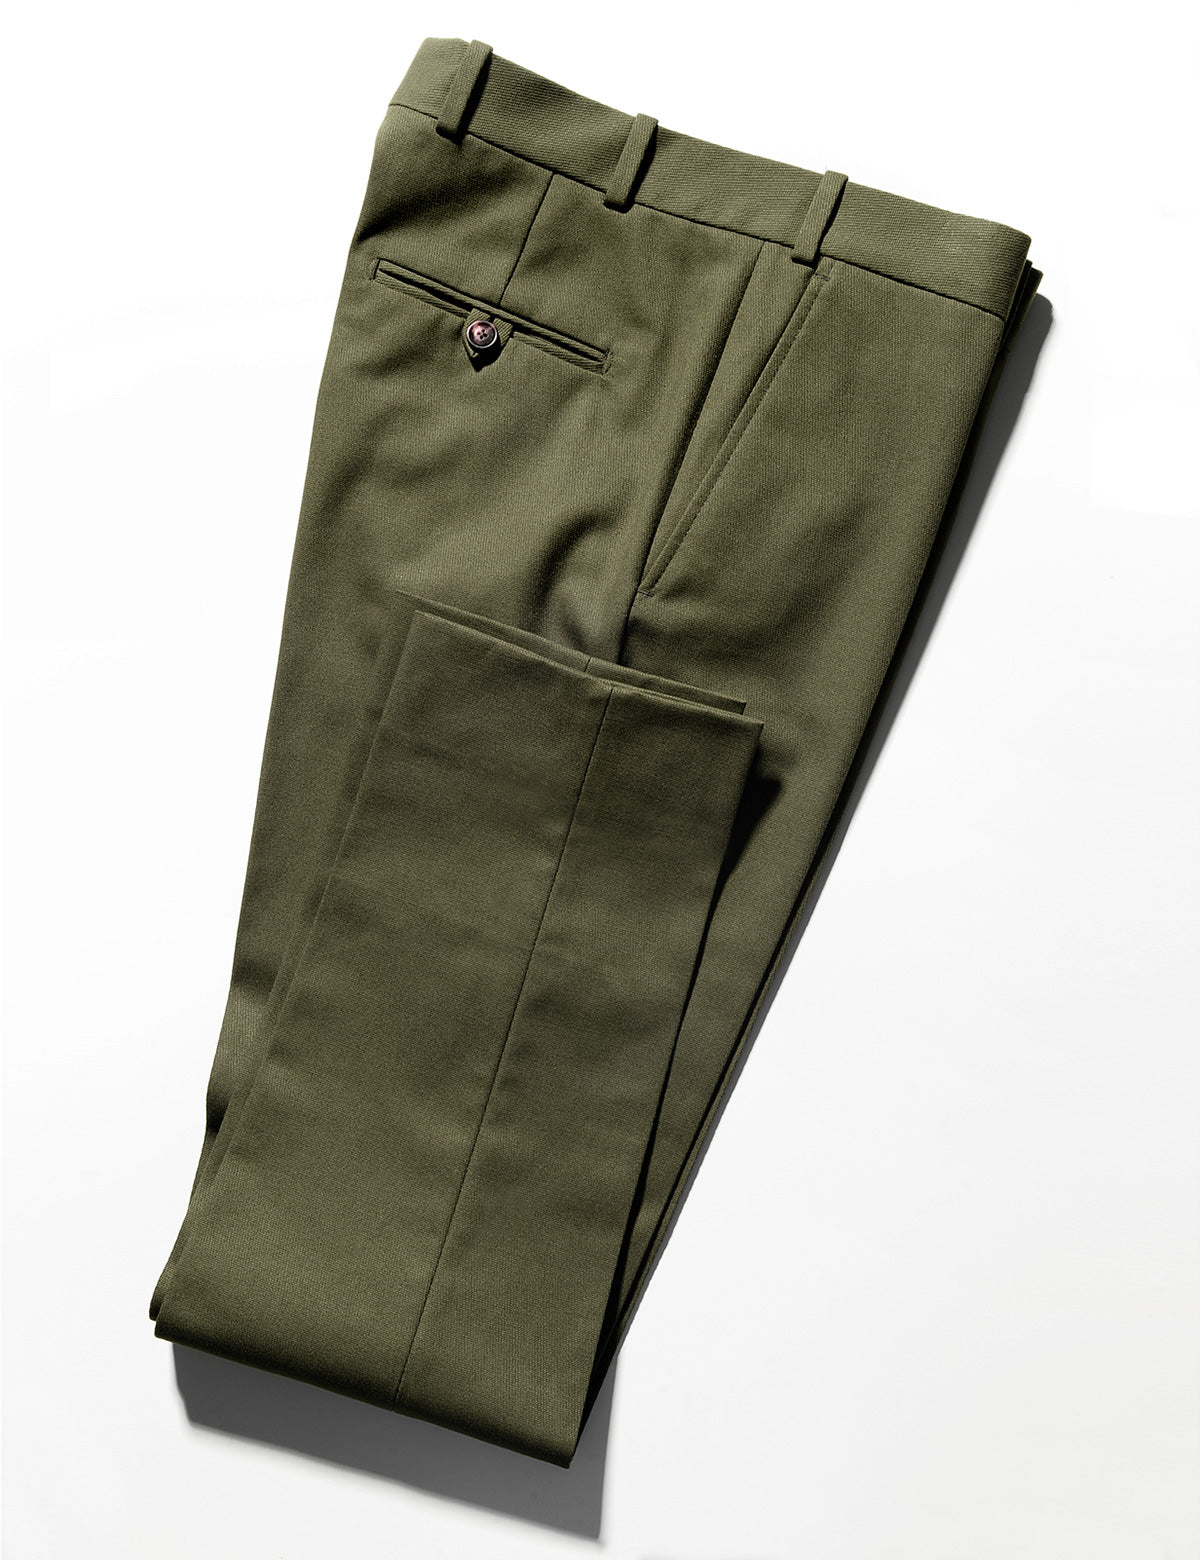 Detail folded shot of Brooklyn Tailors BKT50 Tailored Trousers in Cavalry Twill - Olive showing hem, side and back pockets